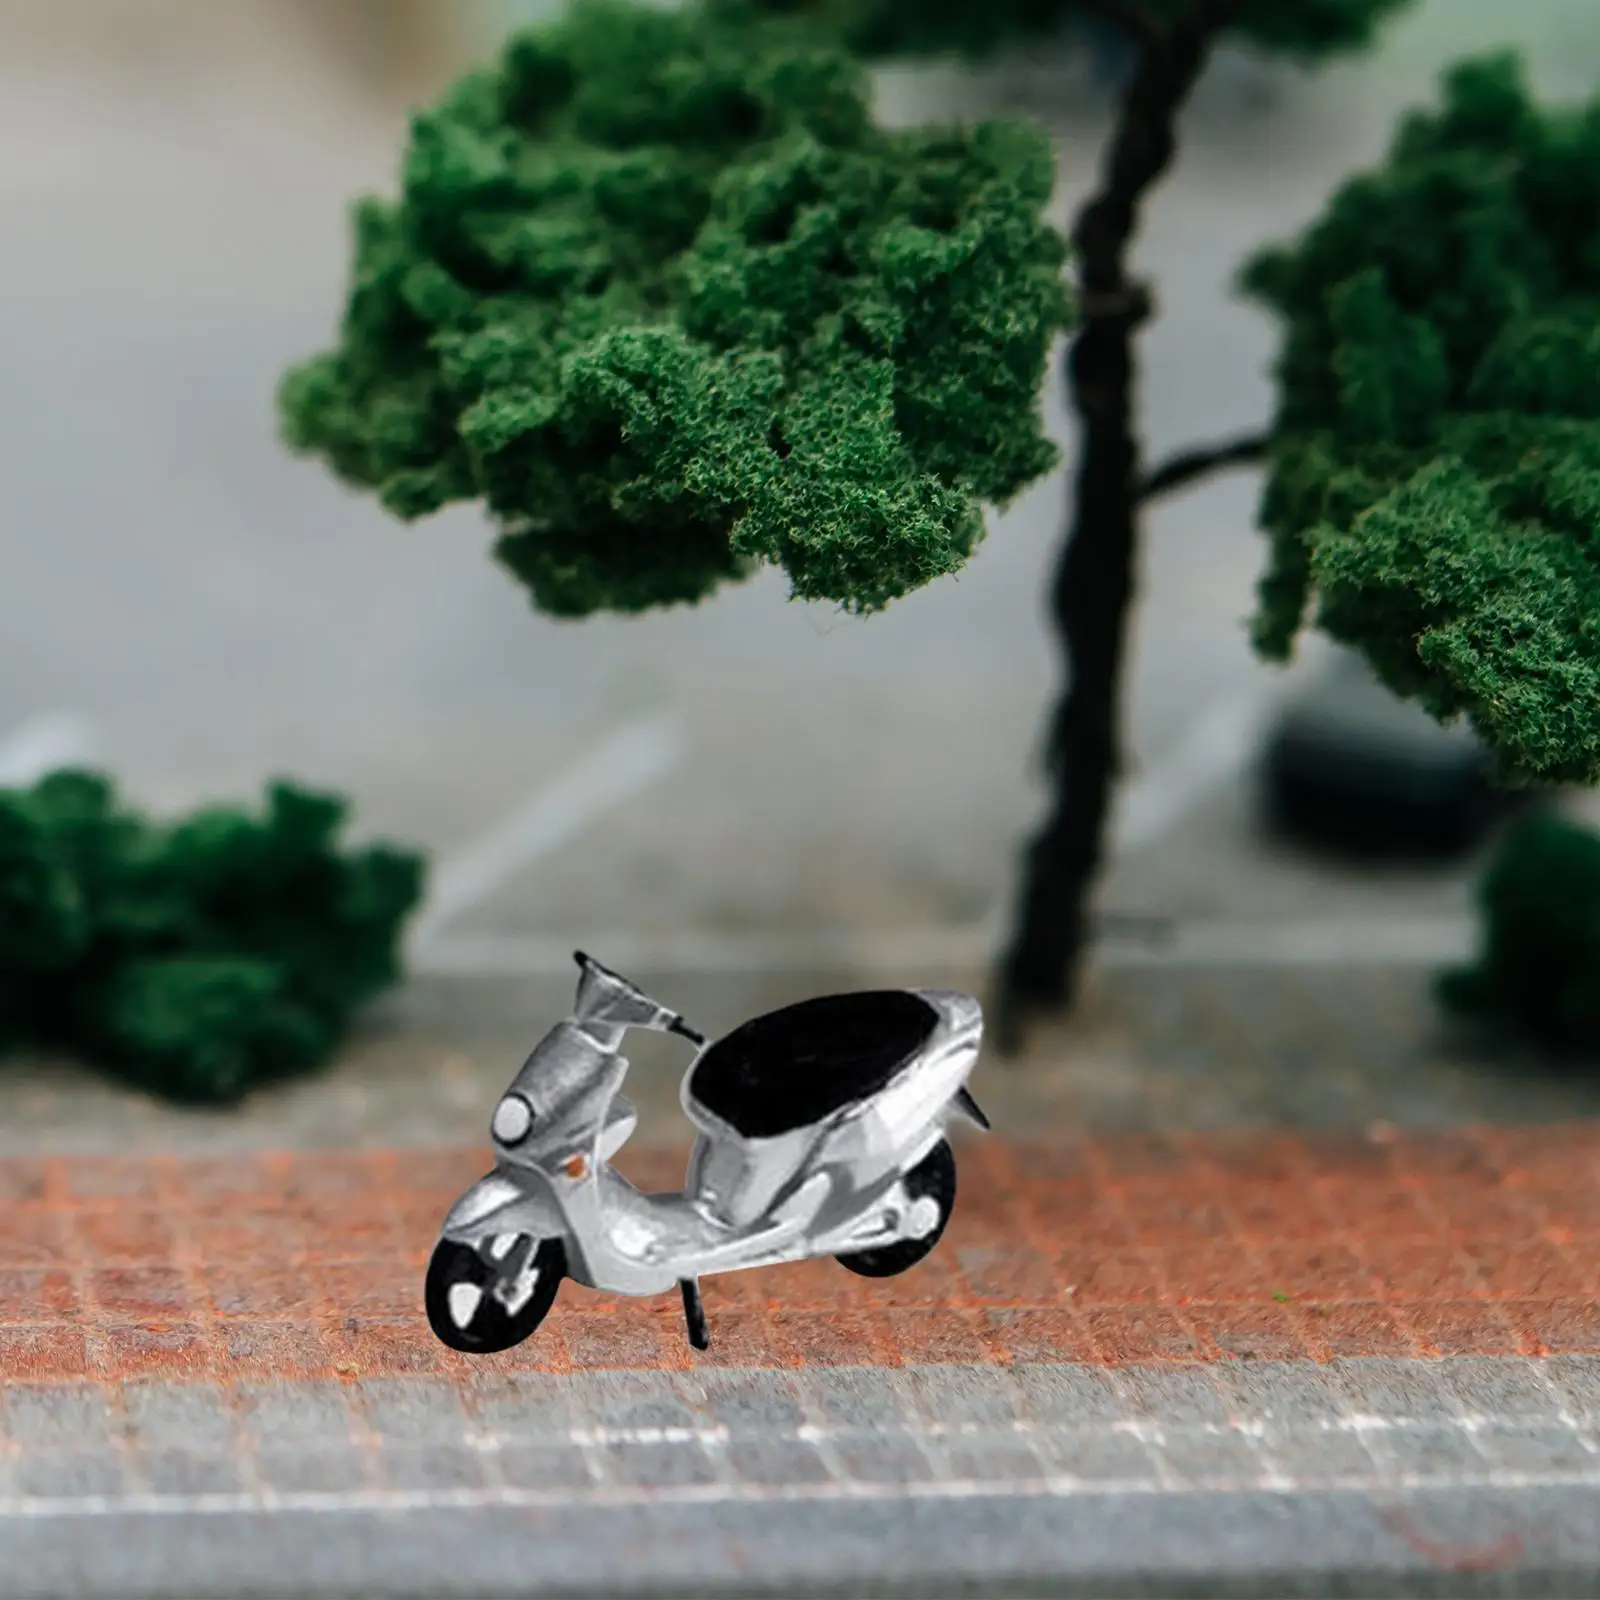 1/64 Motorcycle Model Figure Simulation Sand Table Ornament Miniature Doll Model for Dollhouse Miniature Scene Layout Decoration